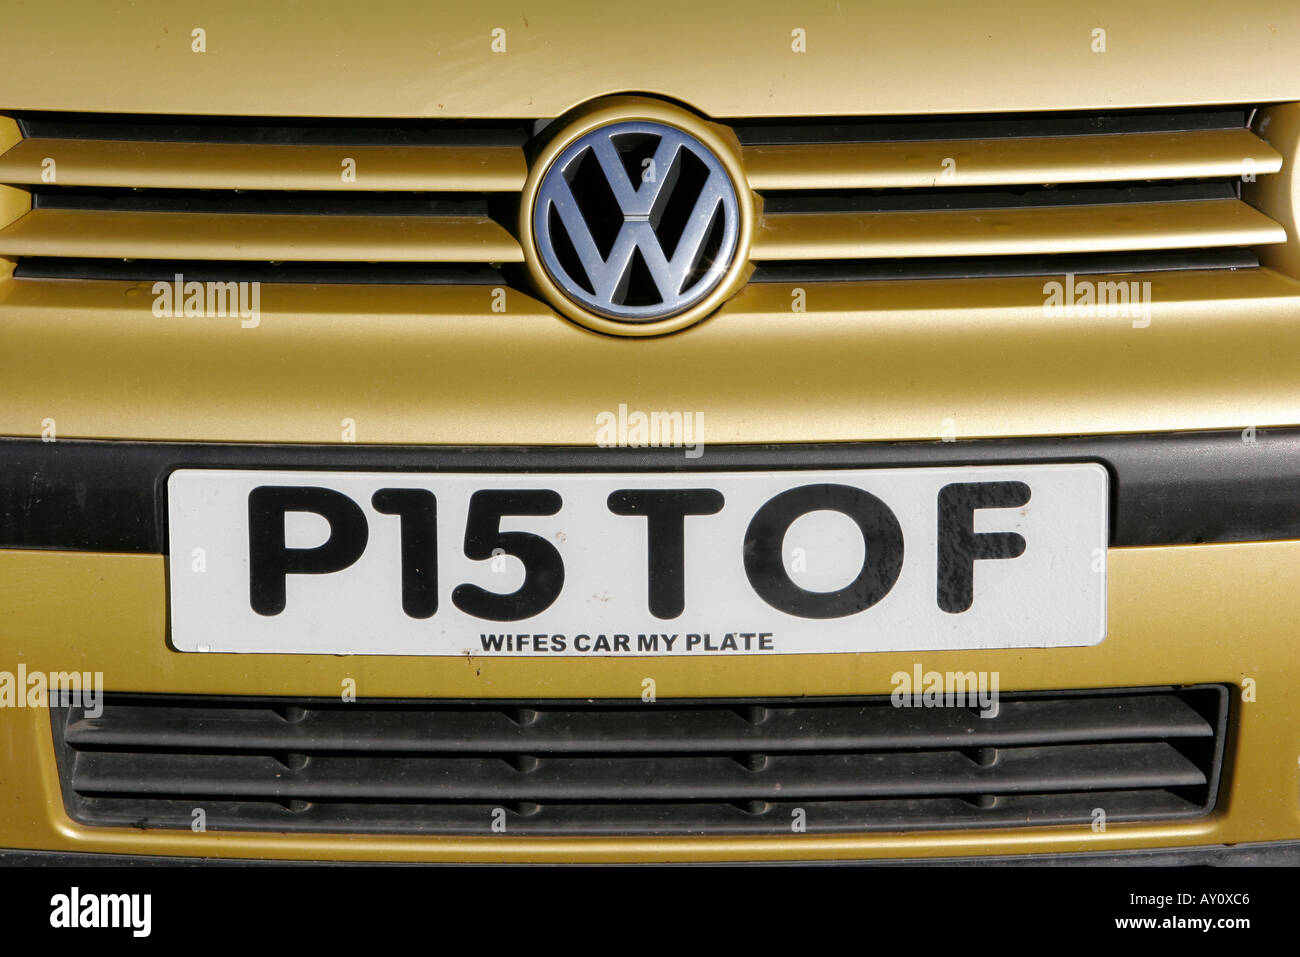 Amusing personalised number plate Stock Photo